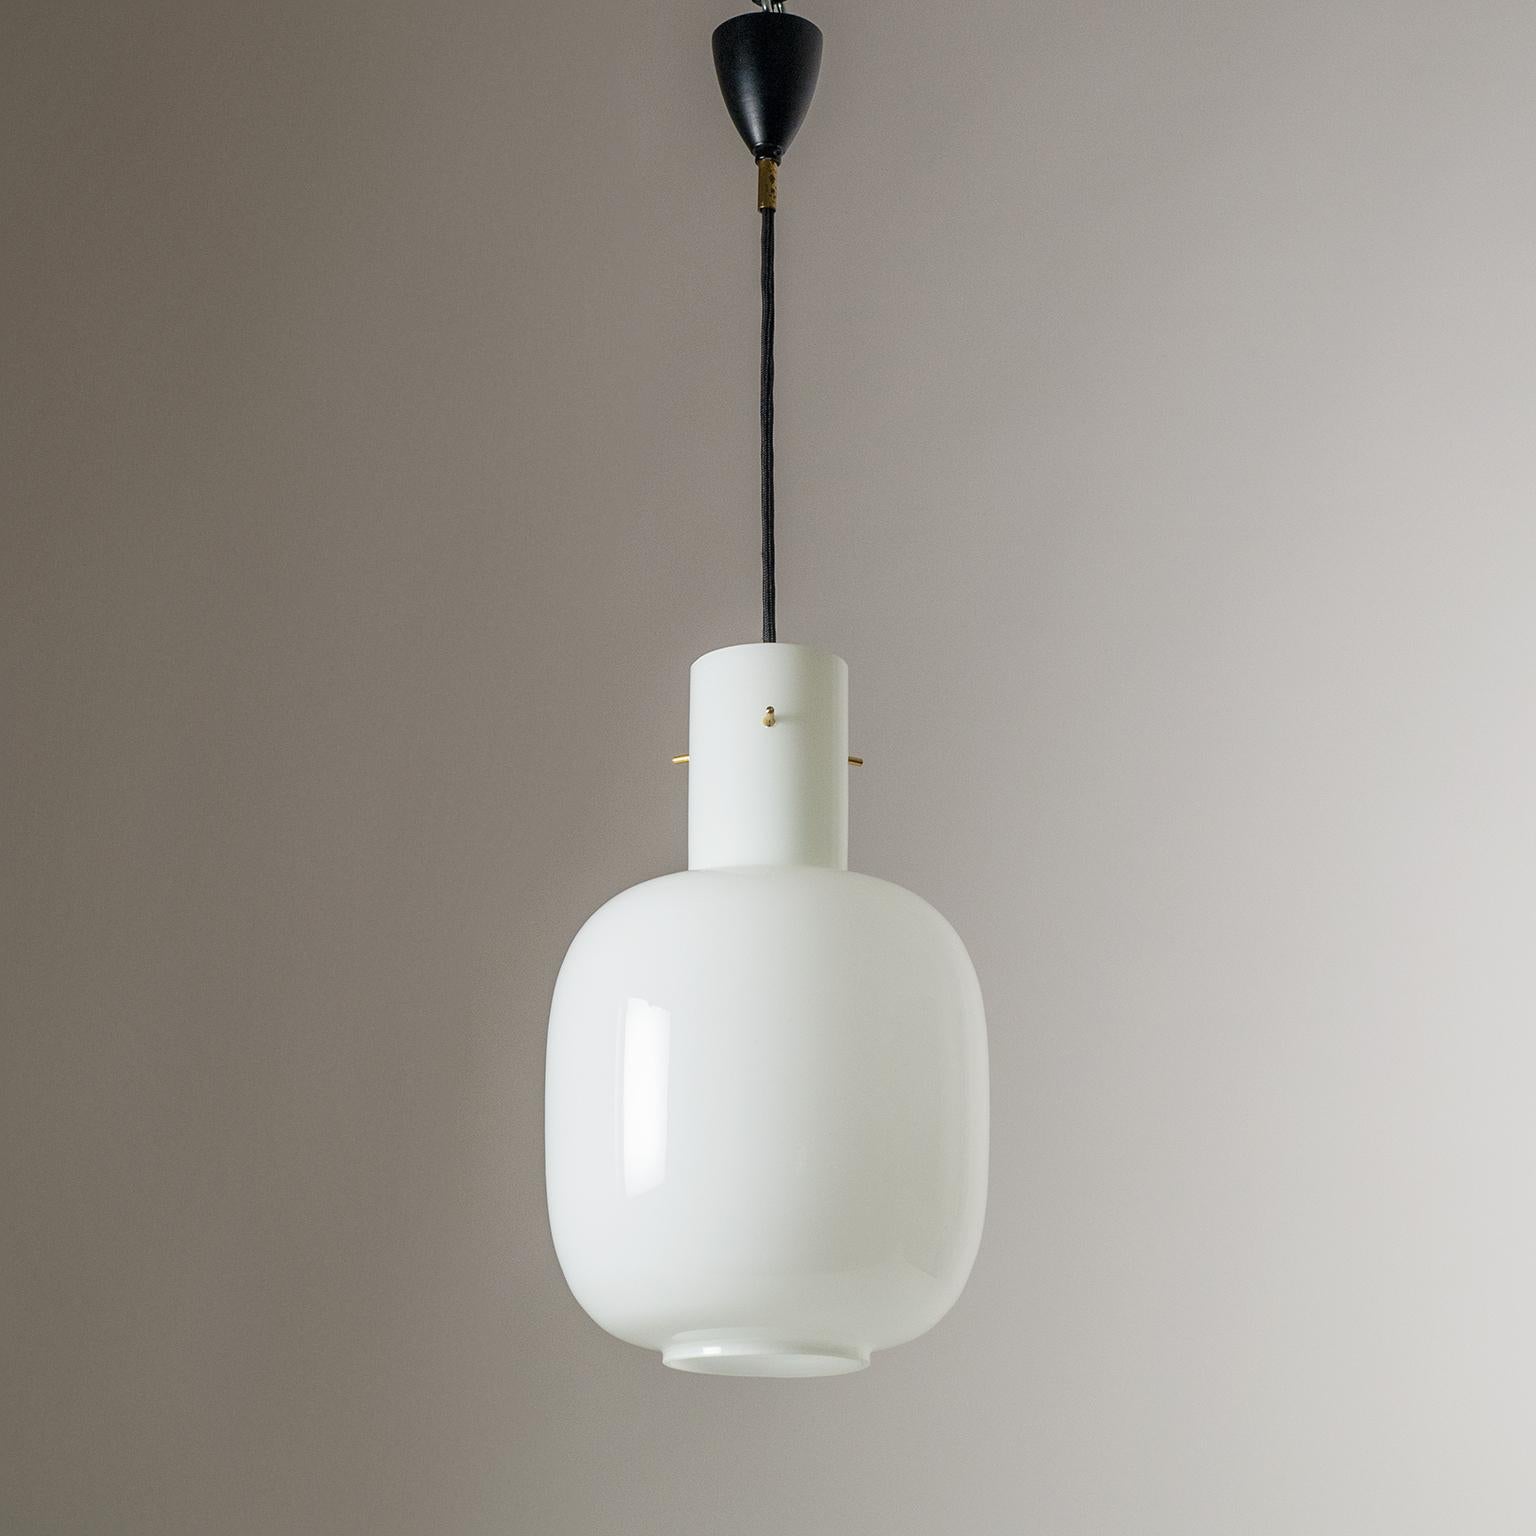 Modernist Italian glass pendant attributed to Stilnovo, 1950s. Nicely sized and proportioned glass body made of 'triplex opal' glass which is very typical of Stilnovo. The glass body is suspended by three brass stems. One original brass and ceramic